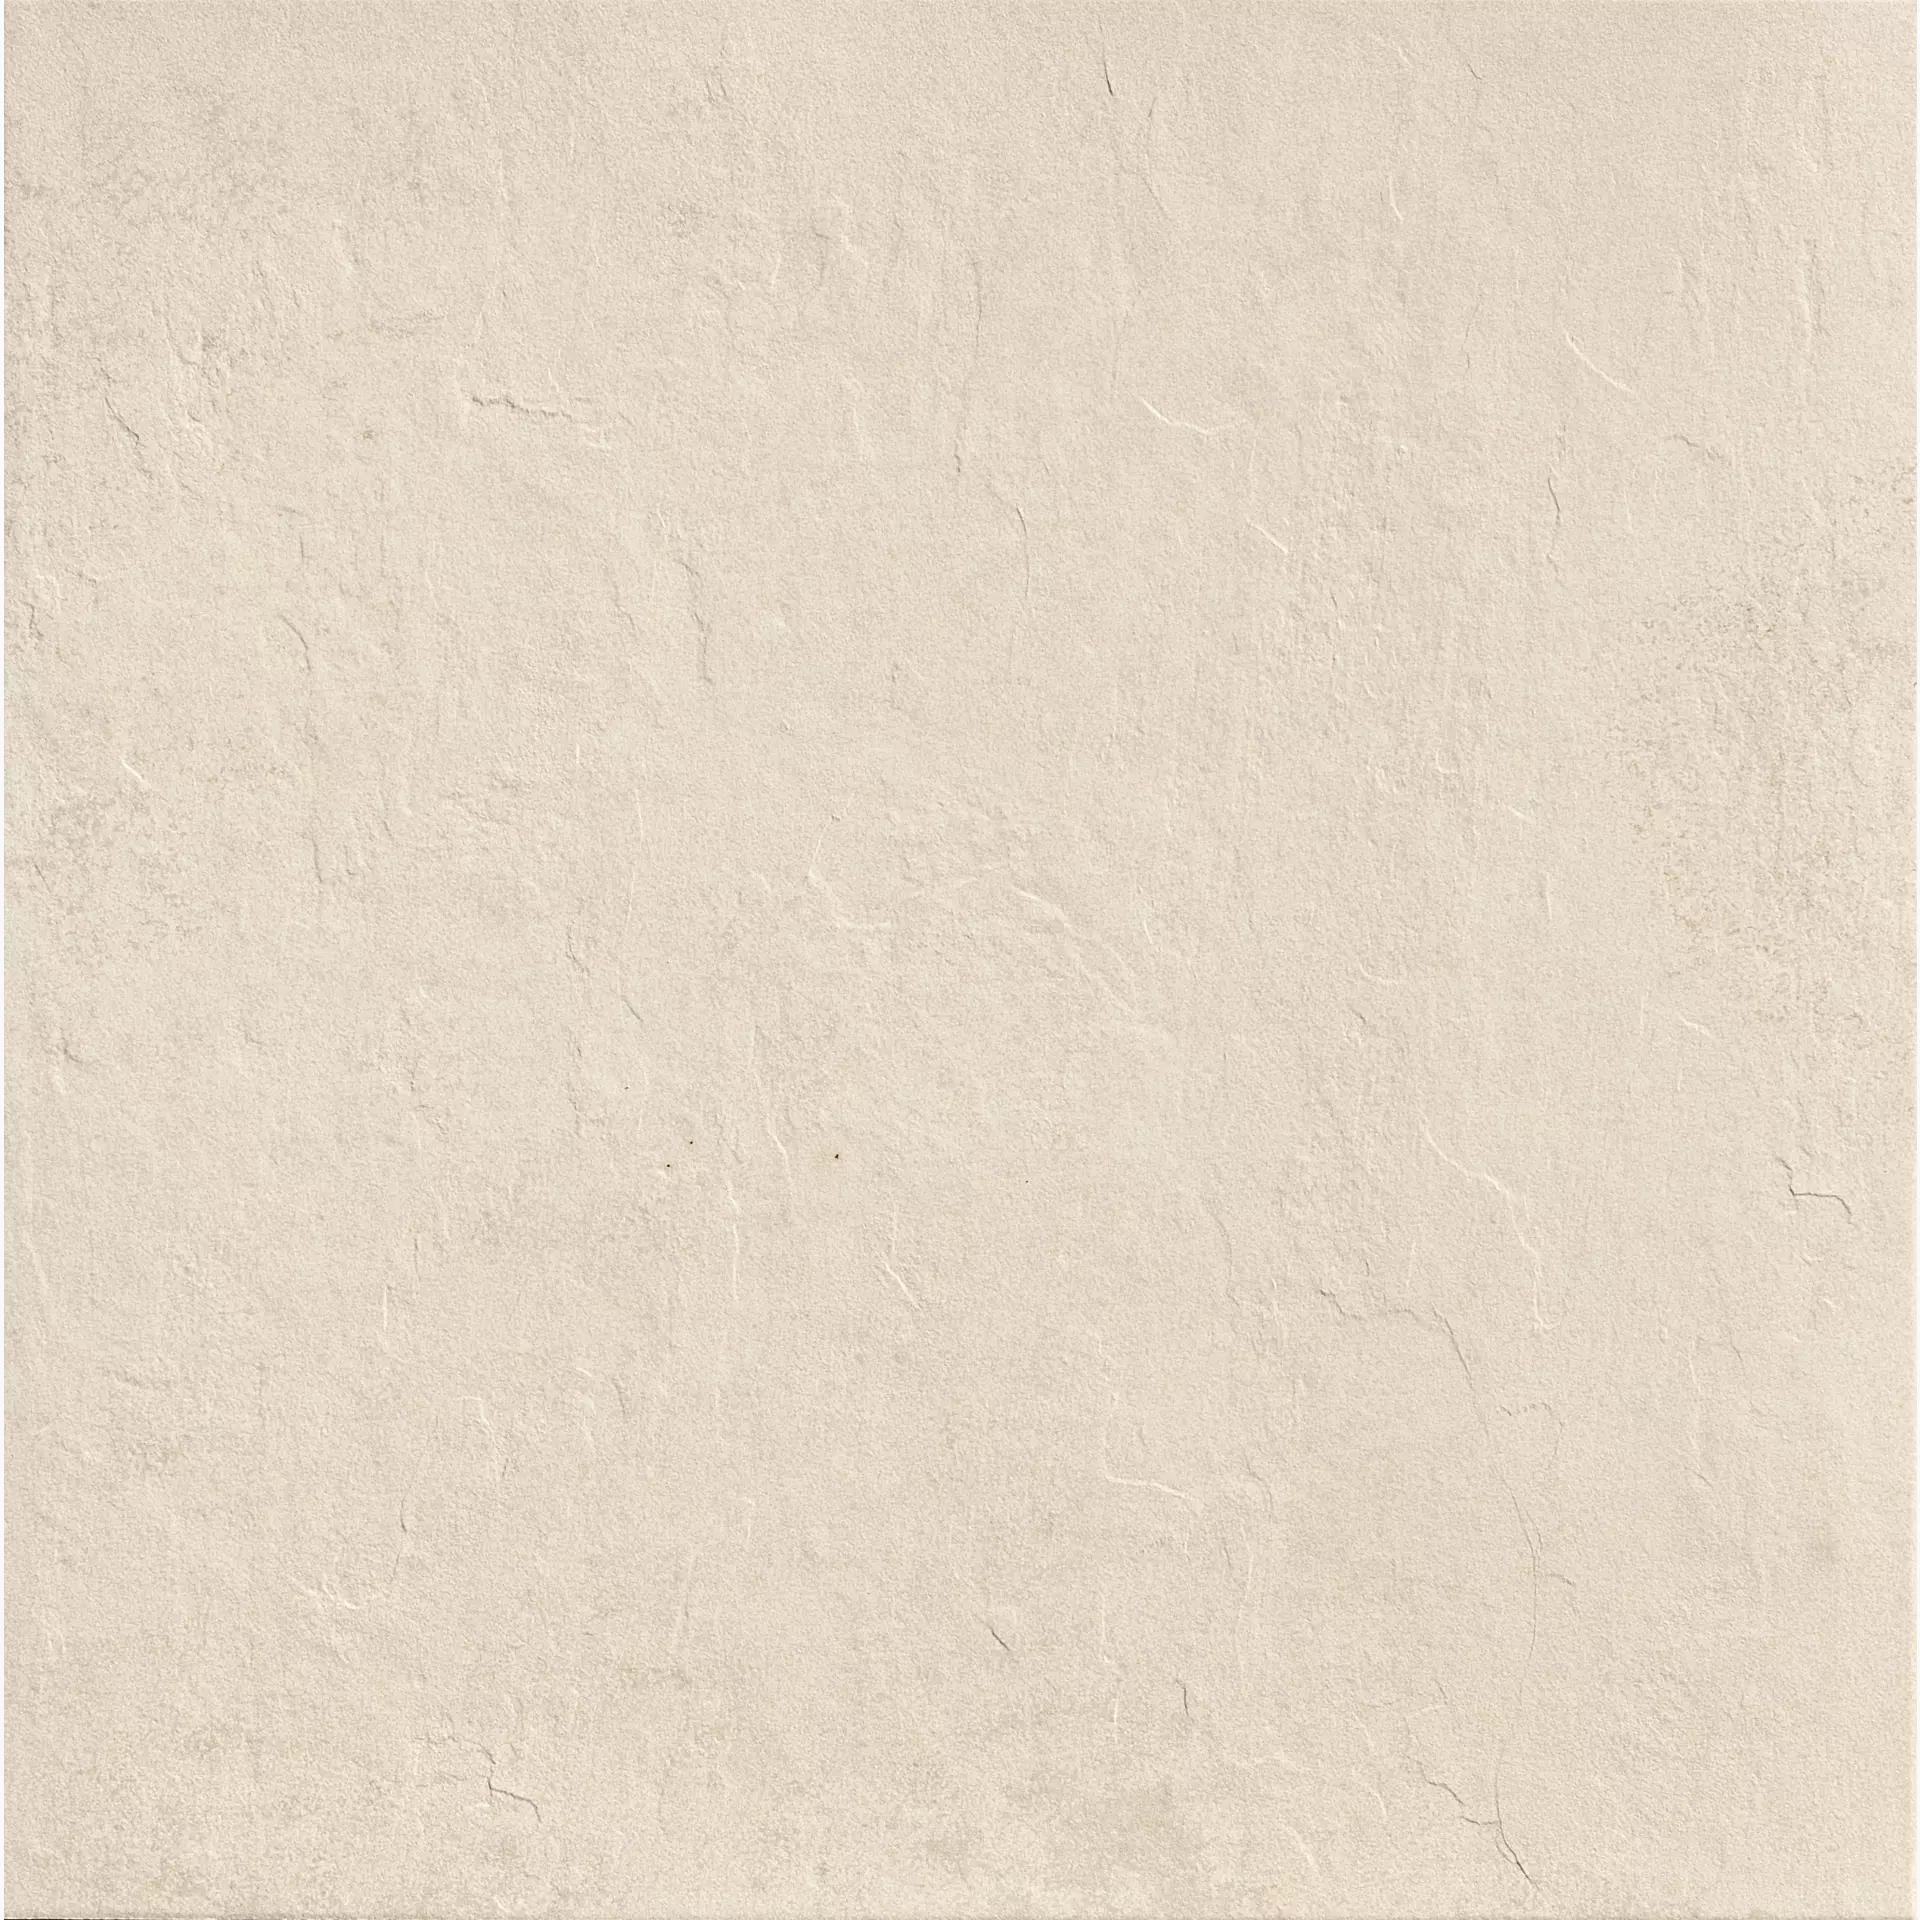 Coem Ardesia Mix Avorio Naturale Base AR601BR 60x60cm rectified 10mm